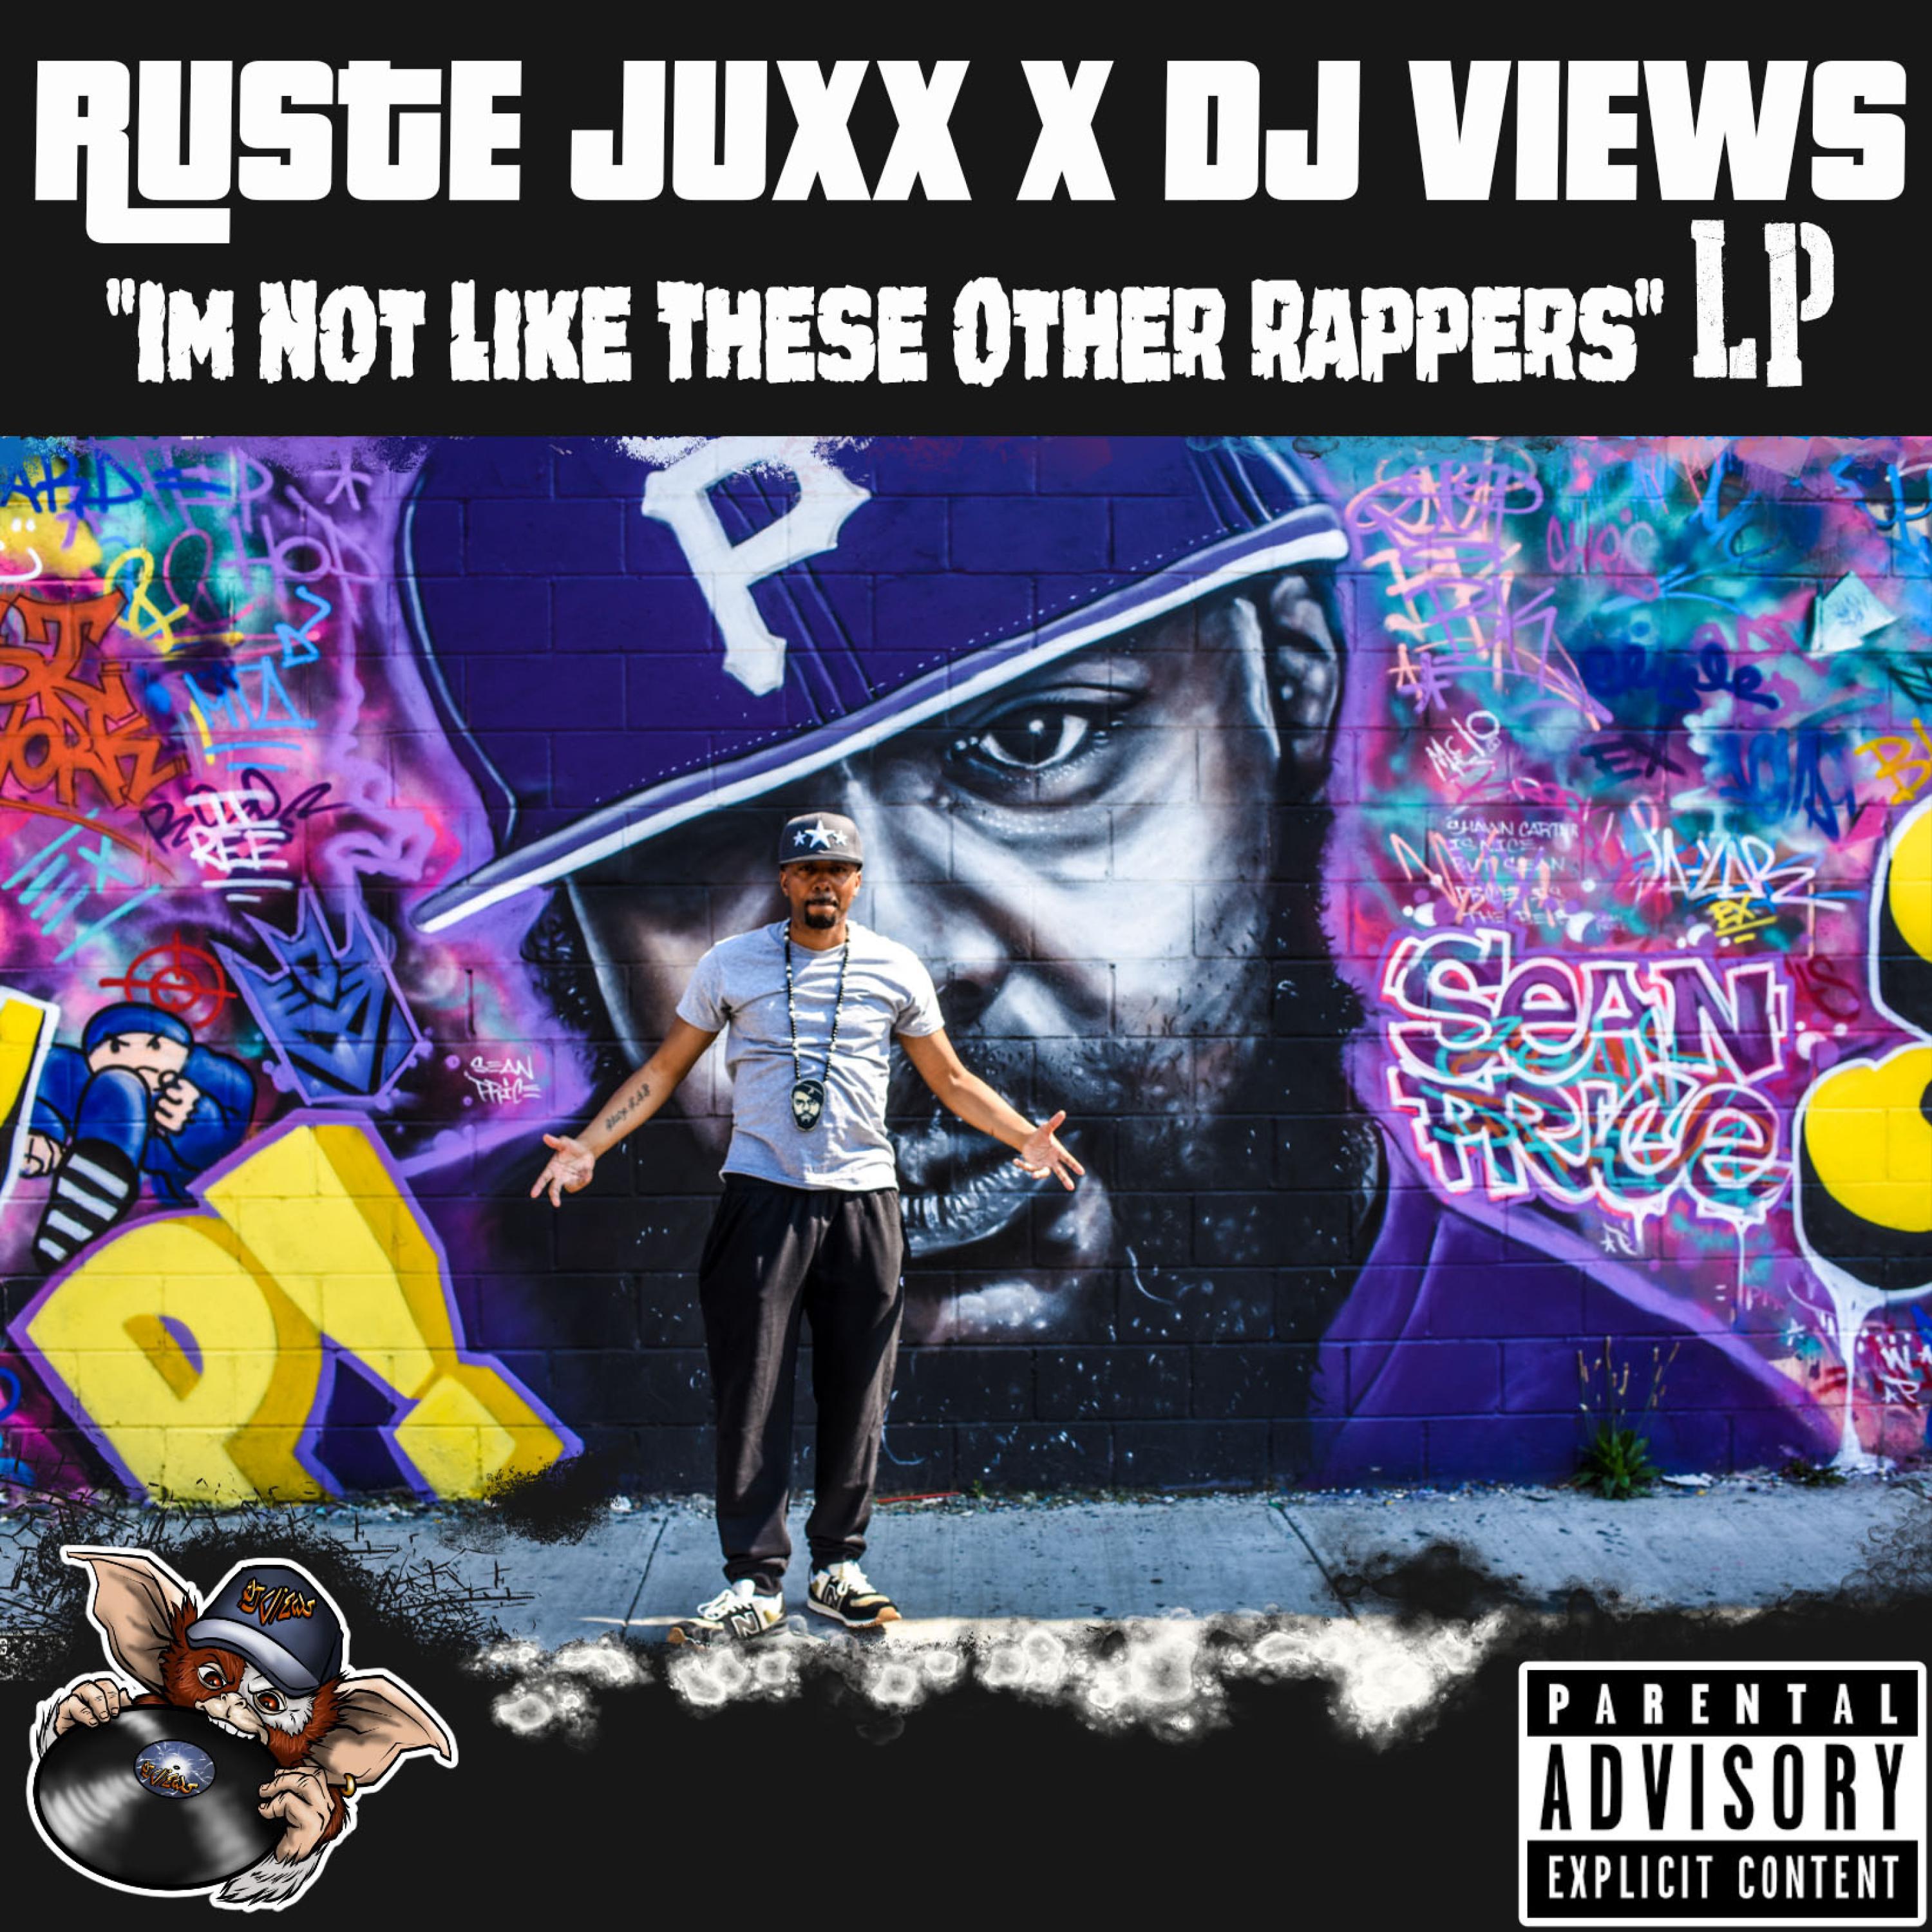 Dj Views - Im Not Like These Other Rappers (feat. Bernadette Price)